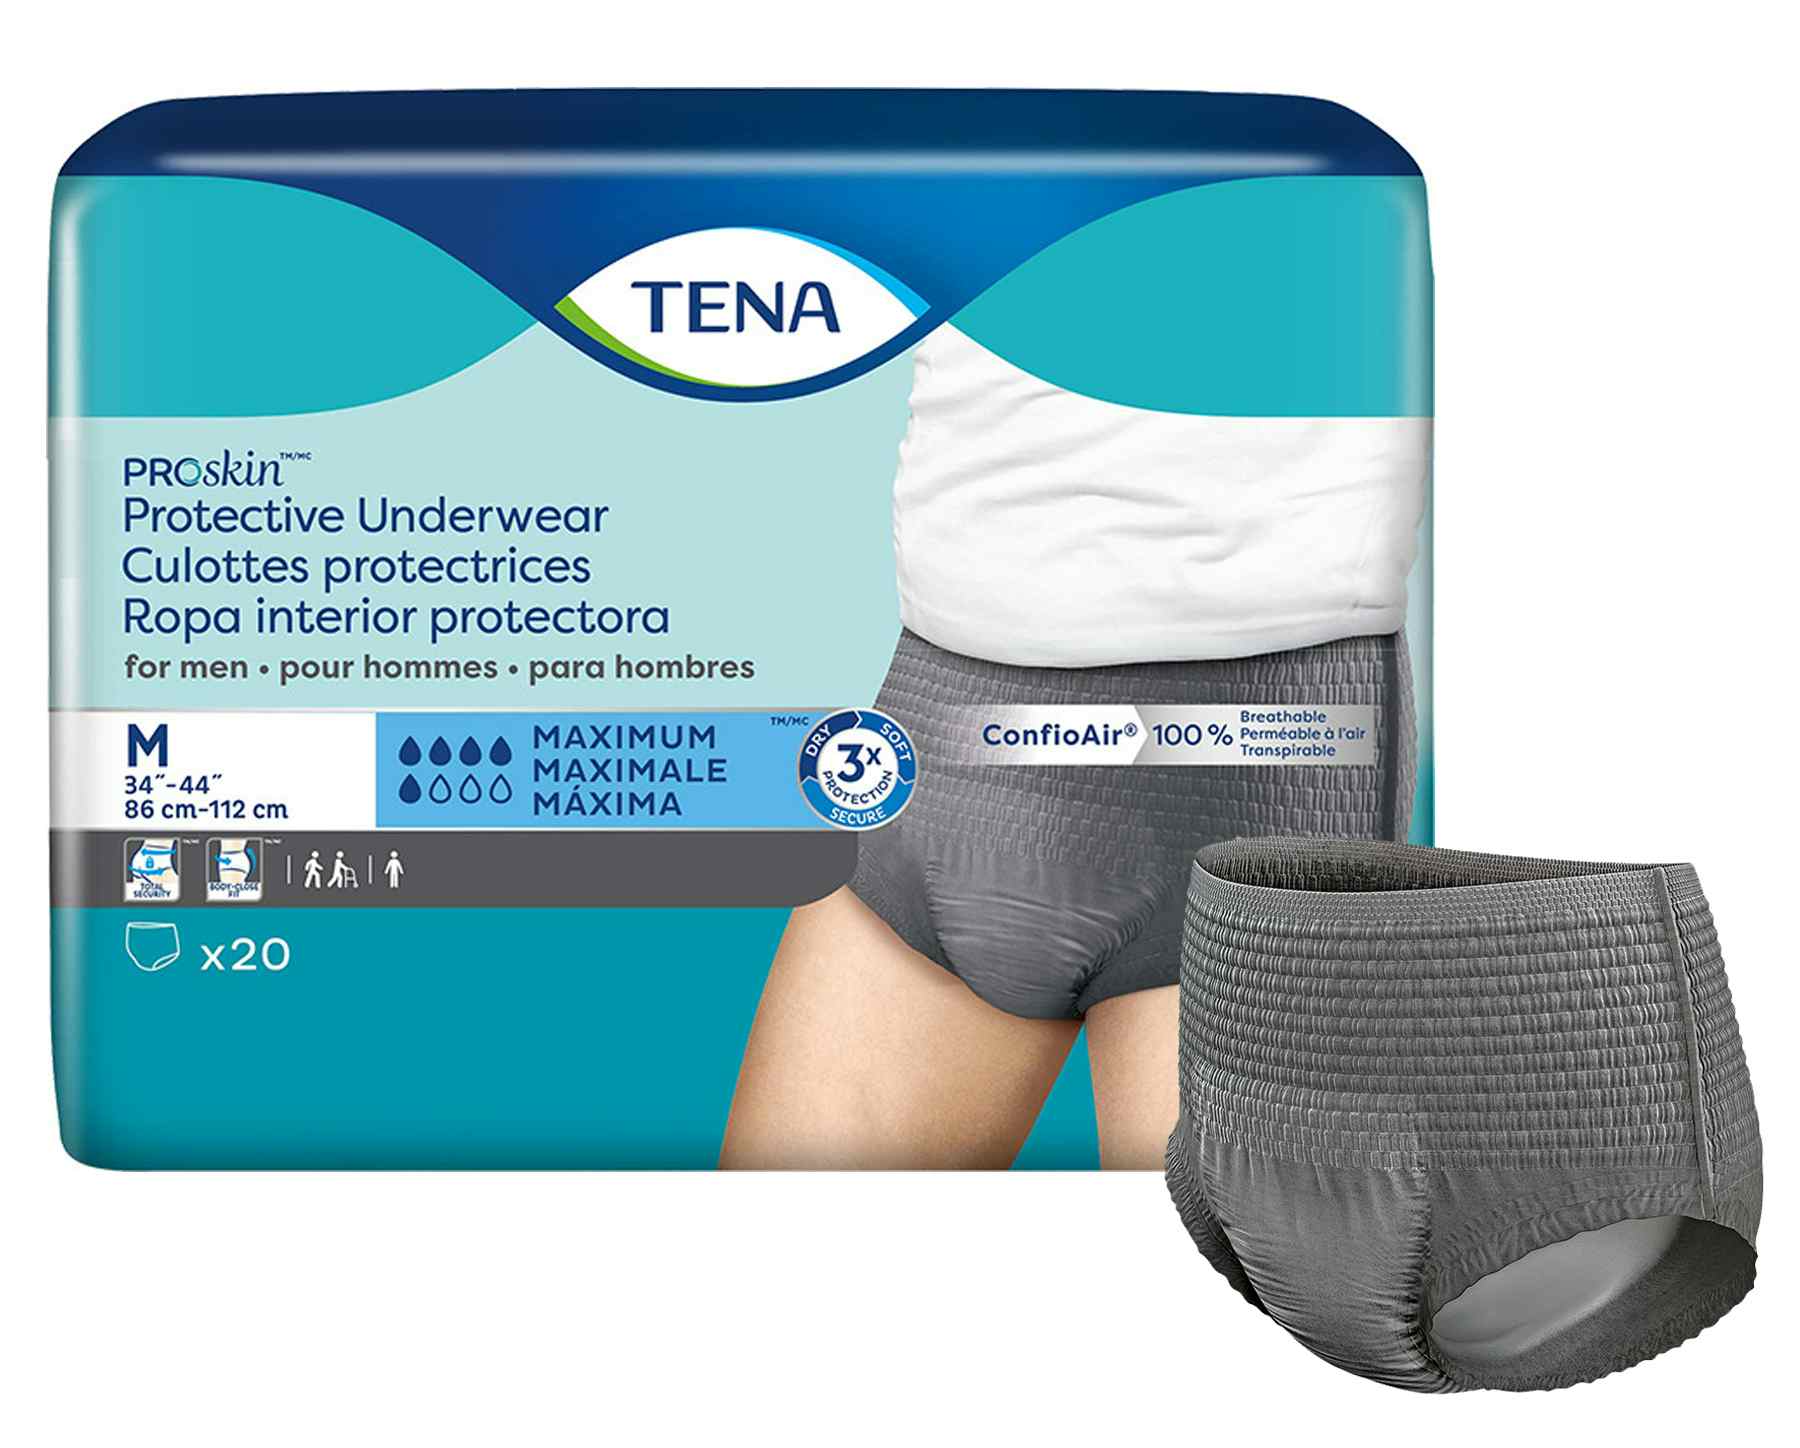 TENA ProSkin Protective Incontinence Underwear for Men, Maximum Absorbency